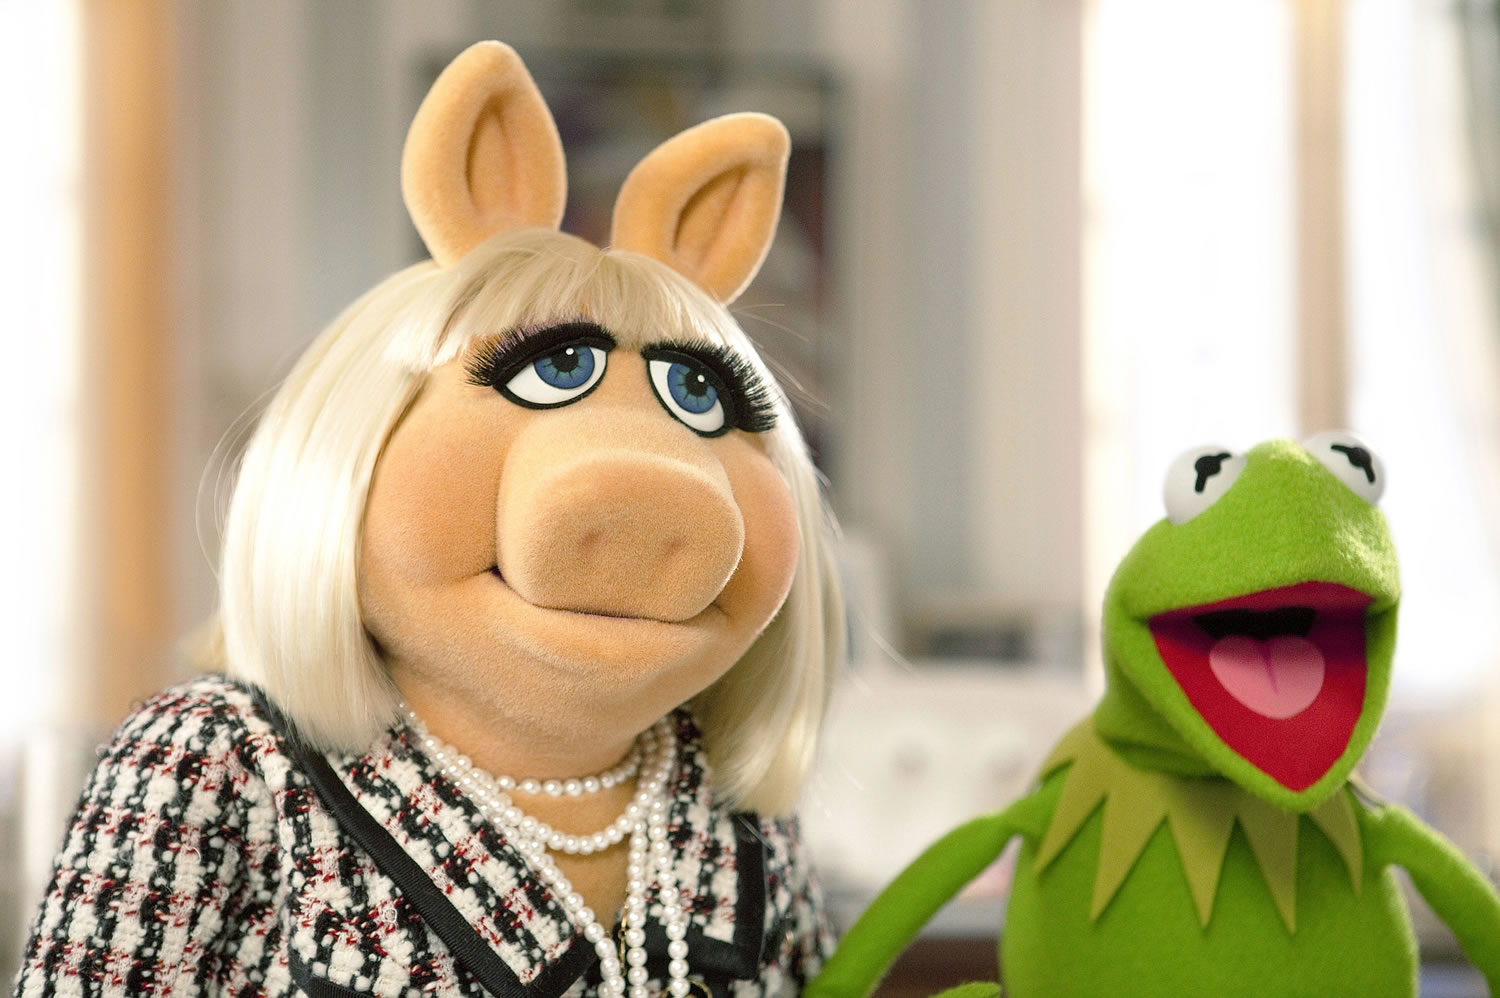 Disney
Miss Piggy, left, and Kermit the Frog will return to television this fall with a new show on ABC.